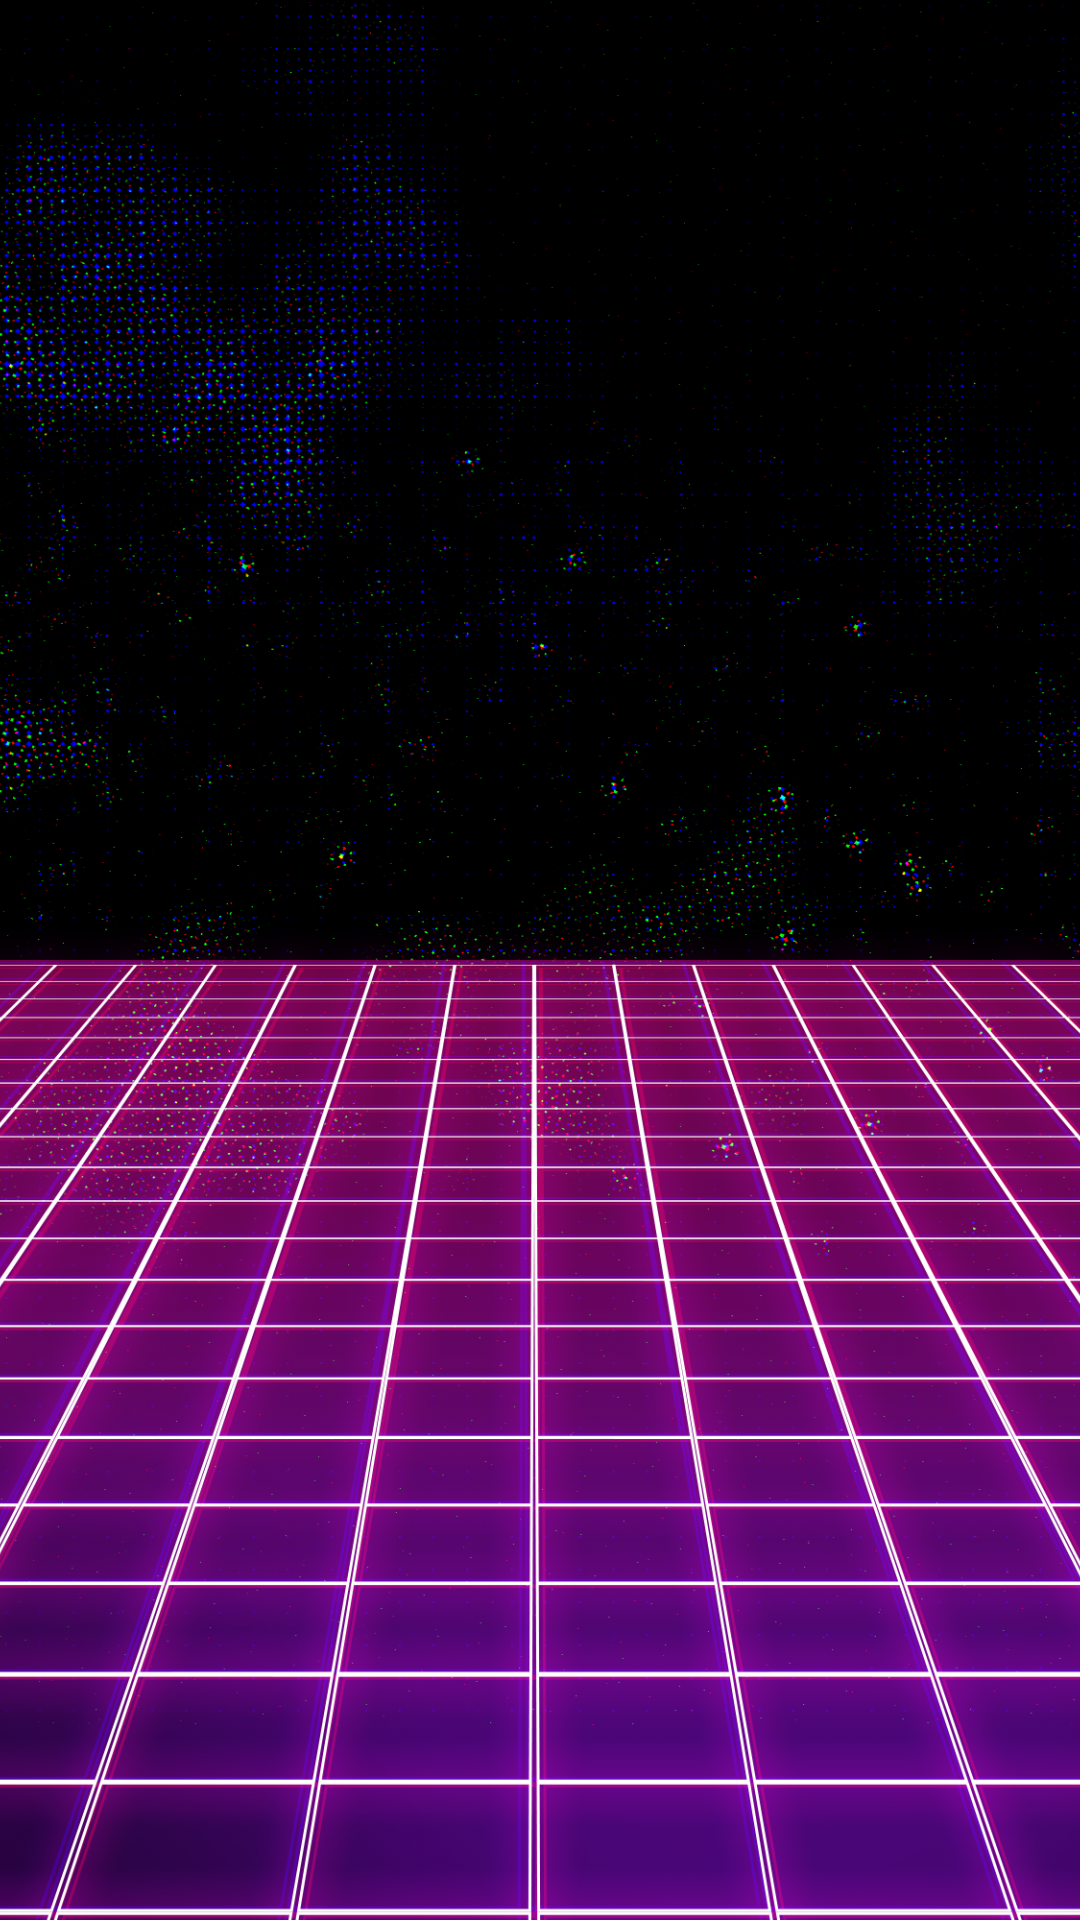 Free download 80s Style Grid wallpaper [4000x2000]